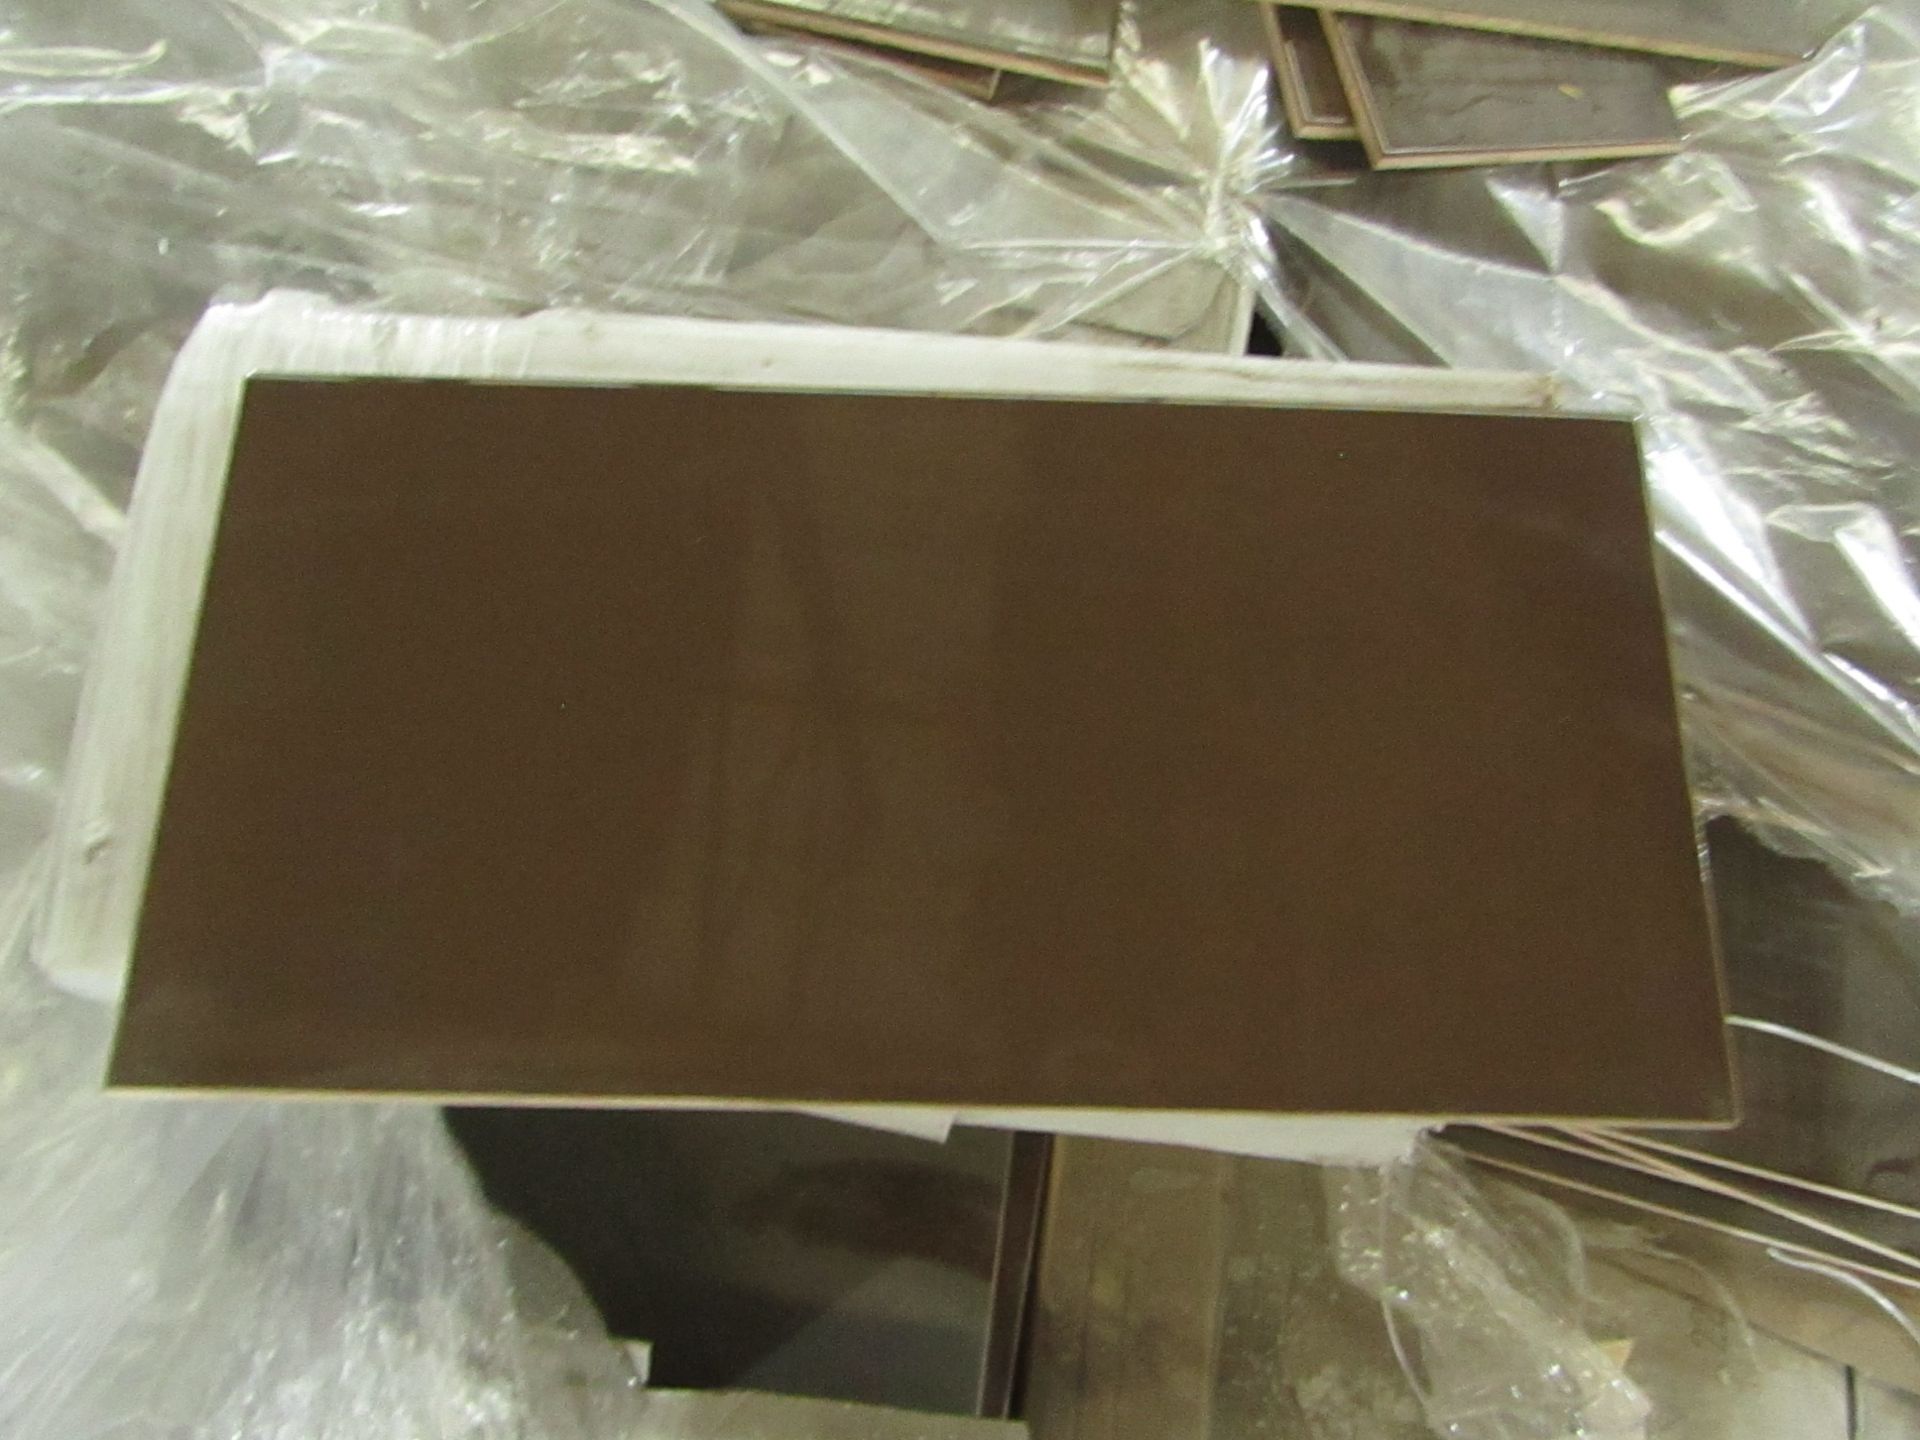 50x Packs of 22 Azuleo Chocolate 150 x 300mm wall tiles, brand new. Total RRP circa £500